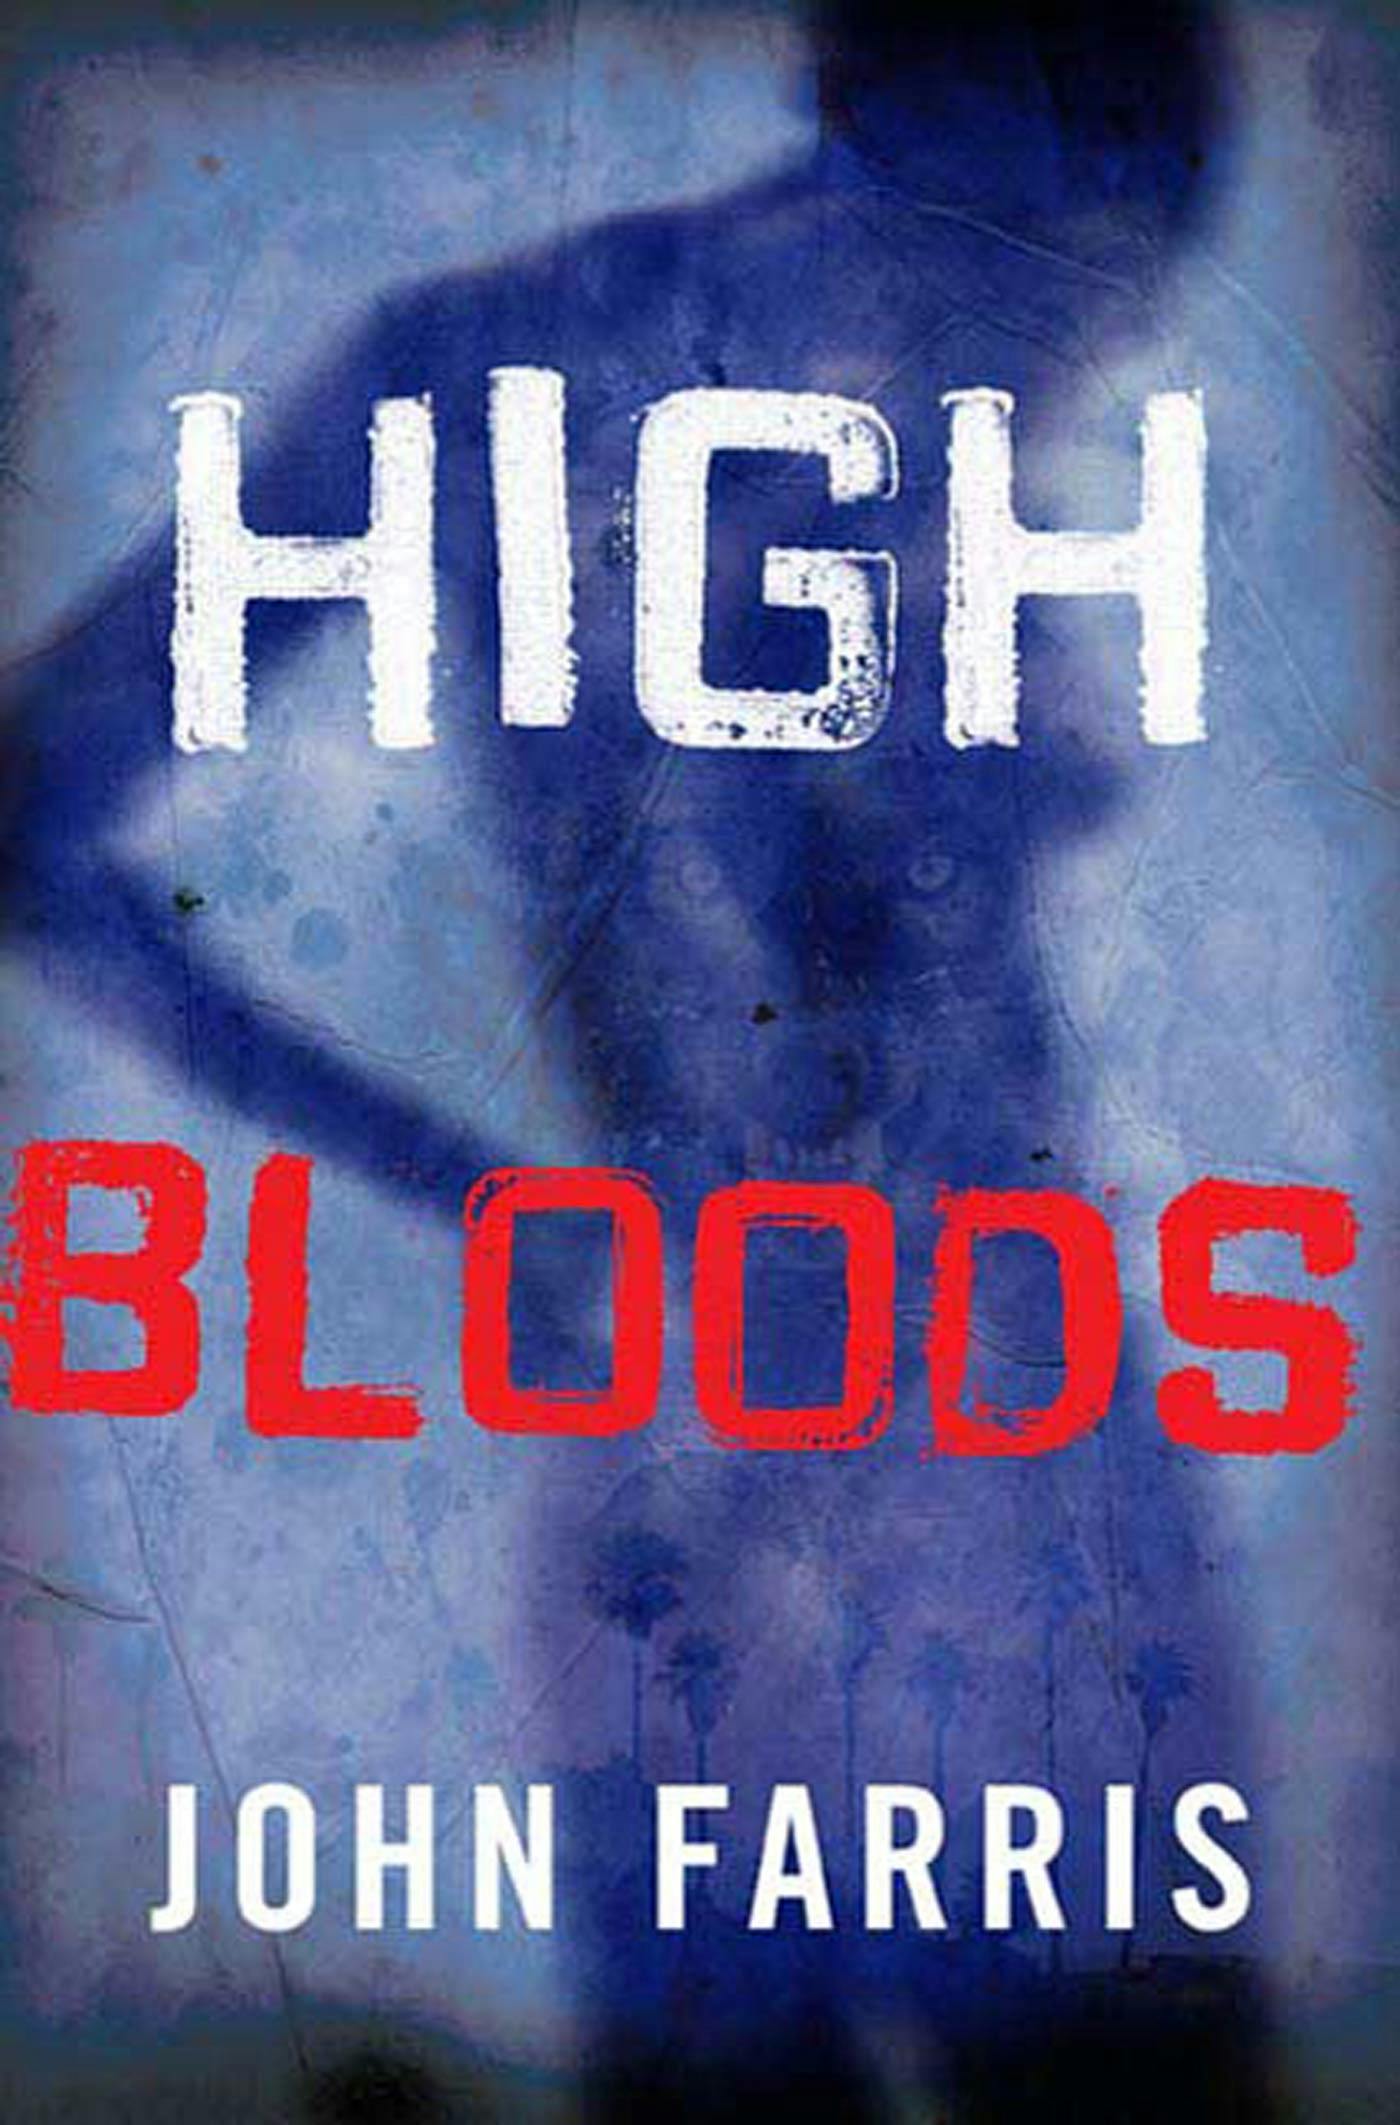 Cover for the book titled as: High Bloods